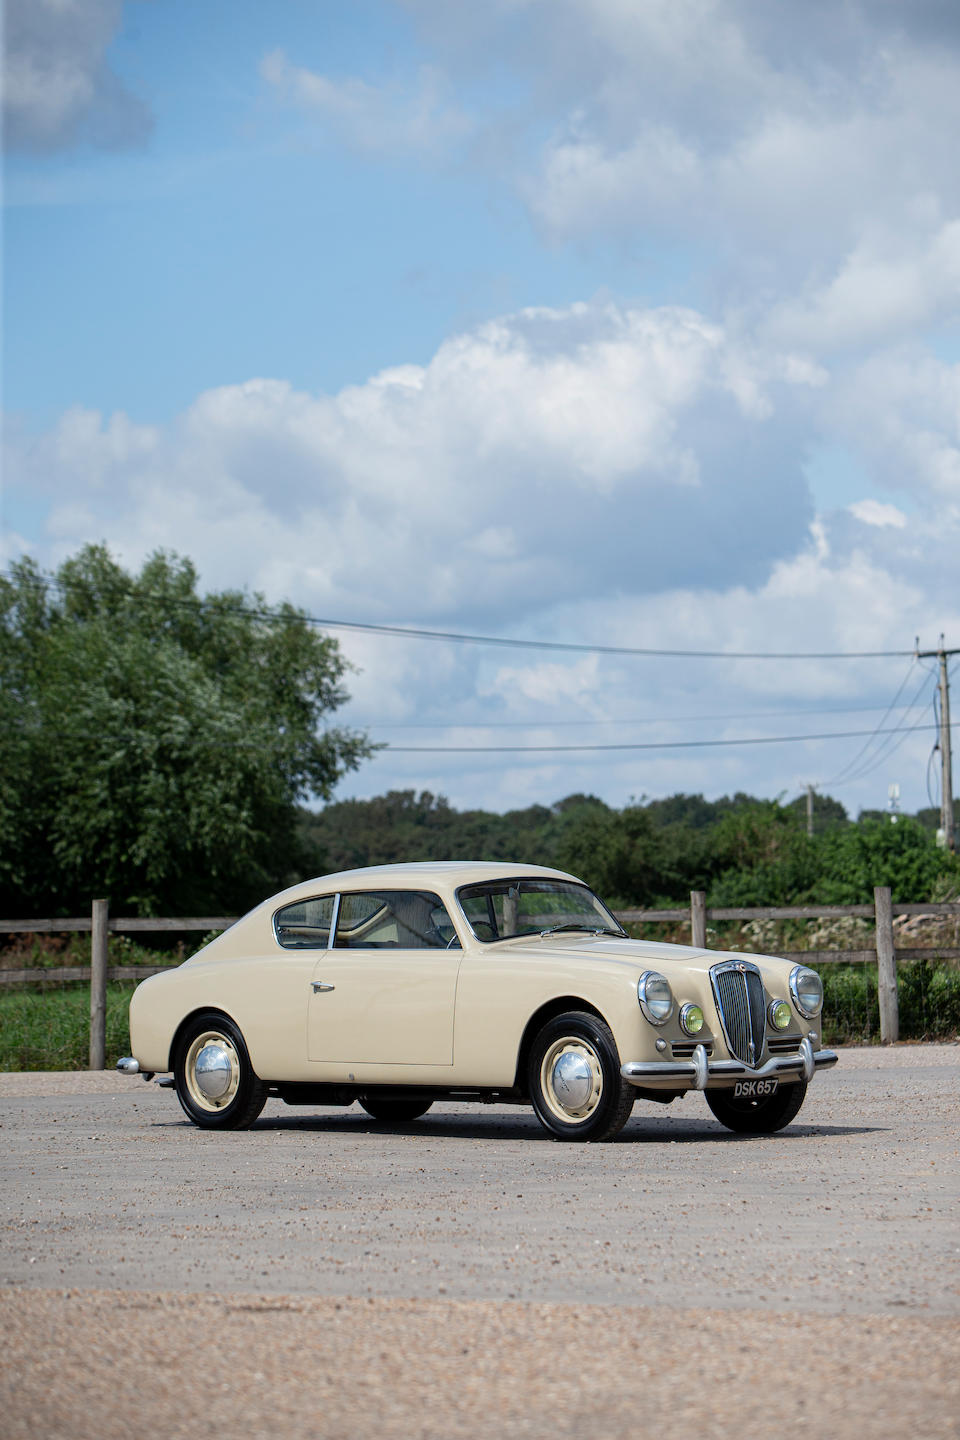 Formerly the property of William 'Bill' Spear, Richie Ginther and Jesse Alexander,1951 First Series Lancia  Aurelia B20 Coupe " Gina "   Chassis no. B20 - 1301 Engine no. 1295